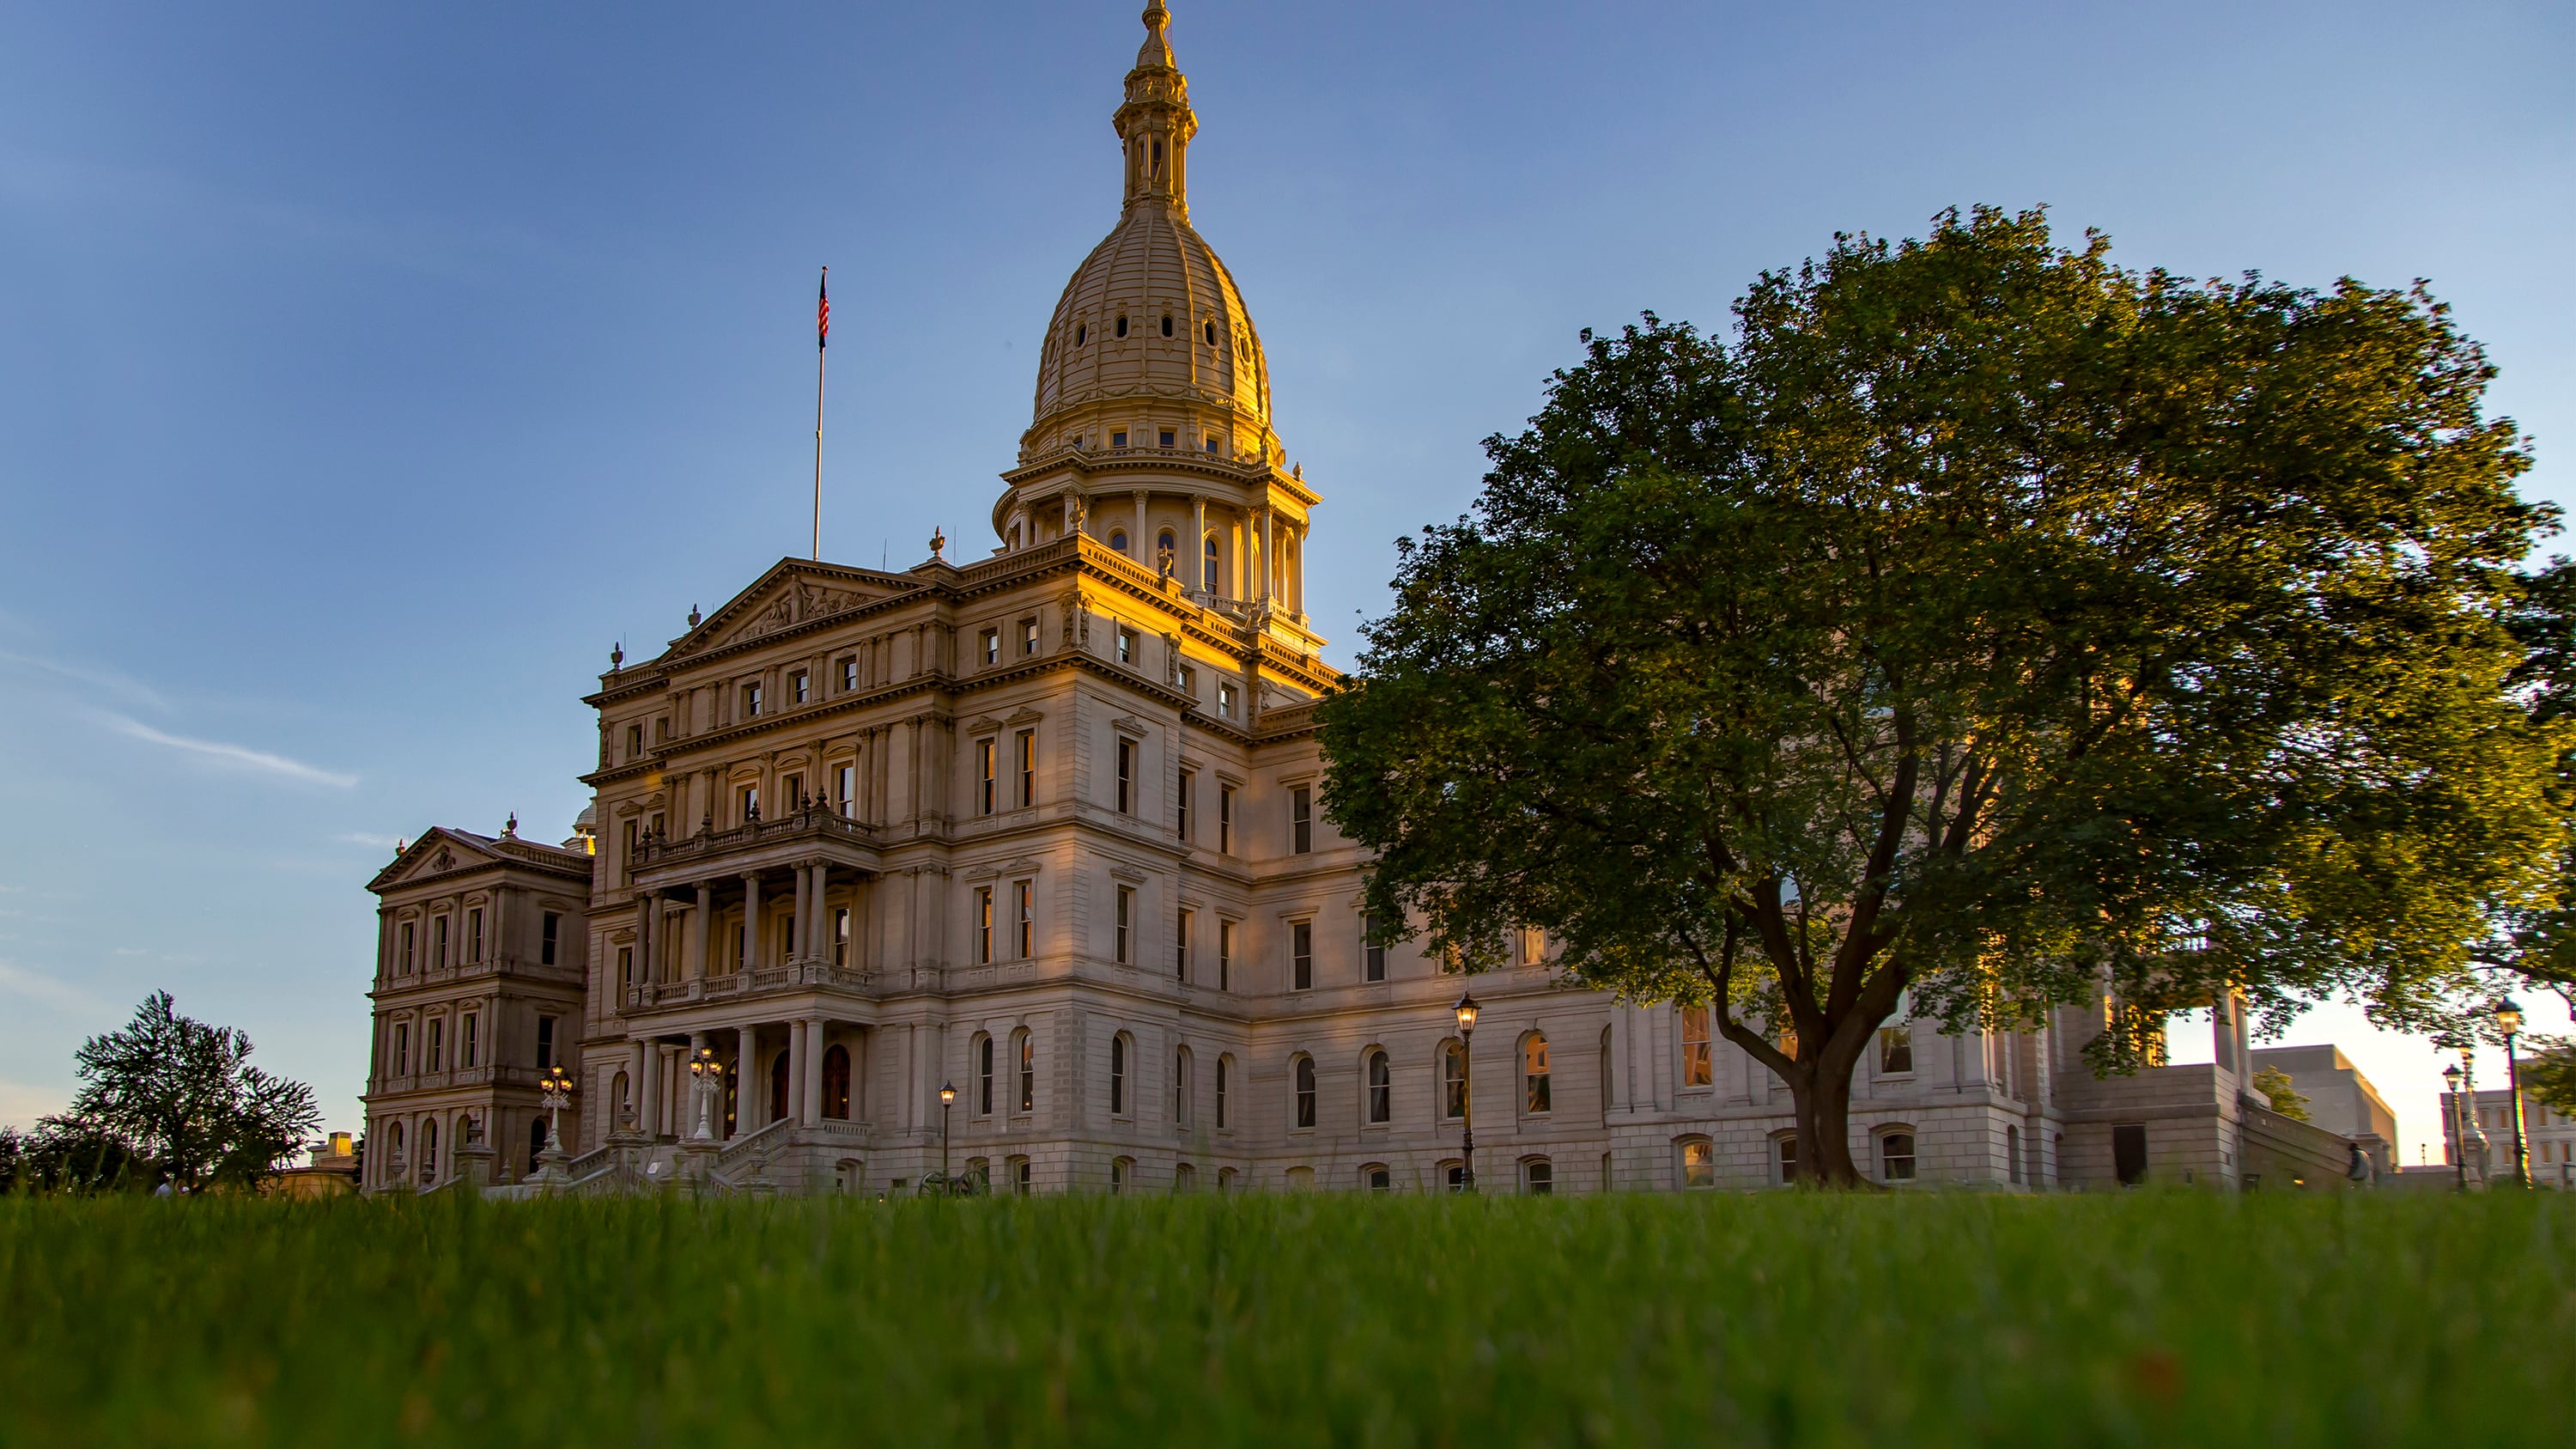 The sun is setting on the capitol building with a large green tree in the foreground and blue sky in the background.